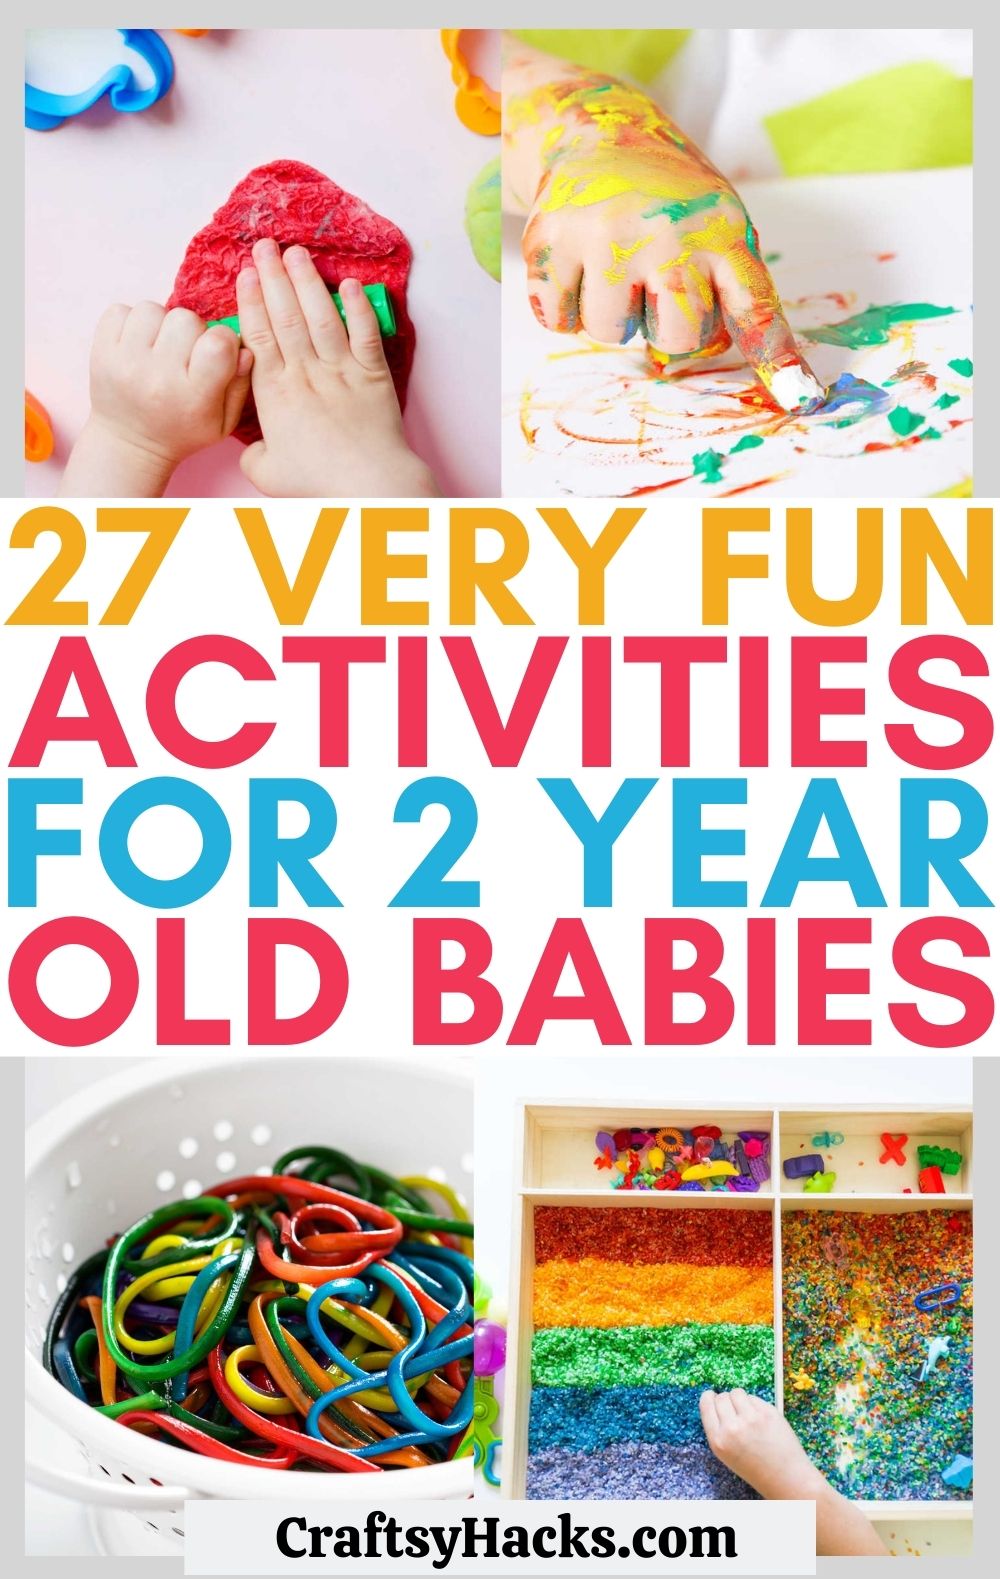 2 year old activities